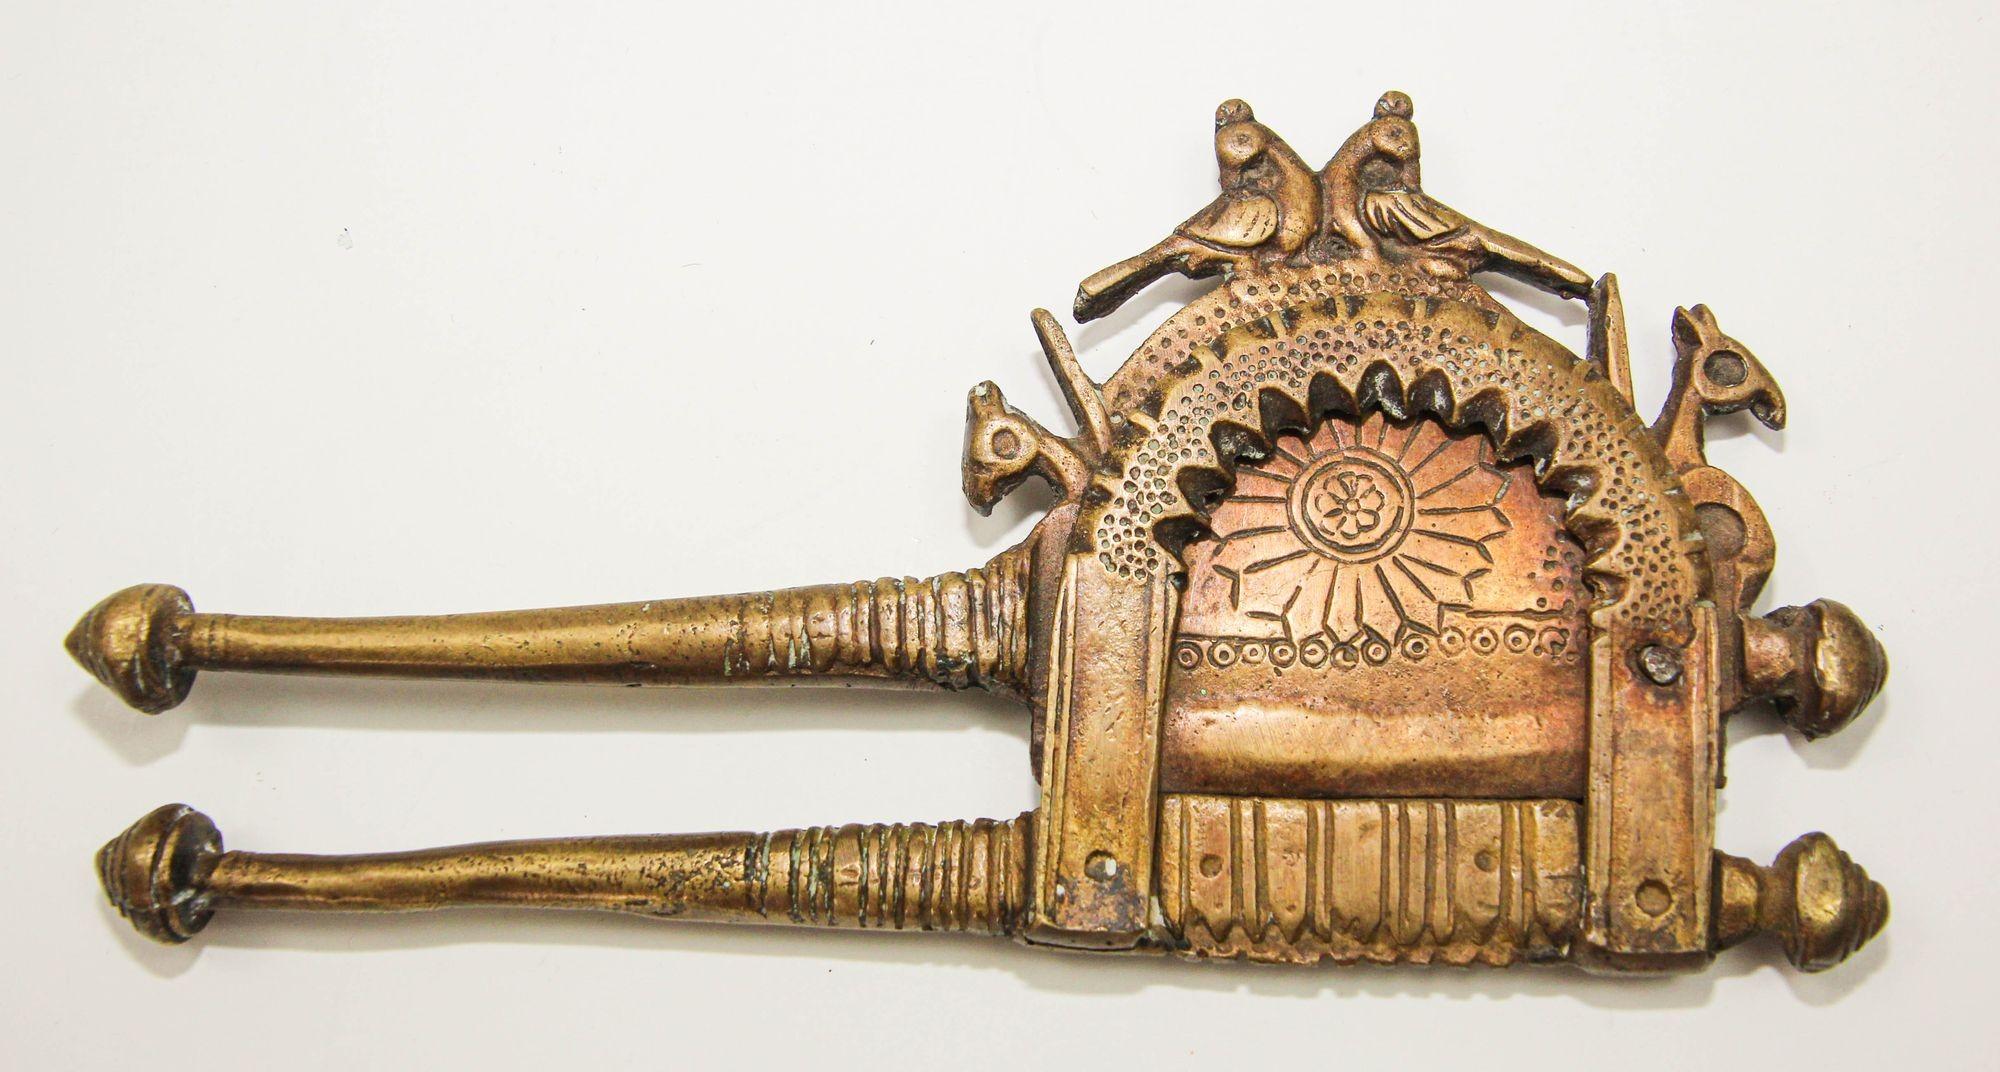 Cast Antique 19th C. Brass Betel Nut Cutter from India Collectible Asian Artifact For Sale